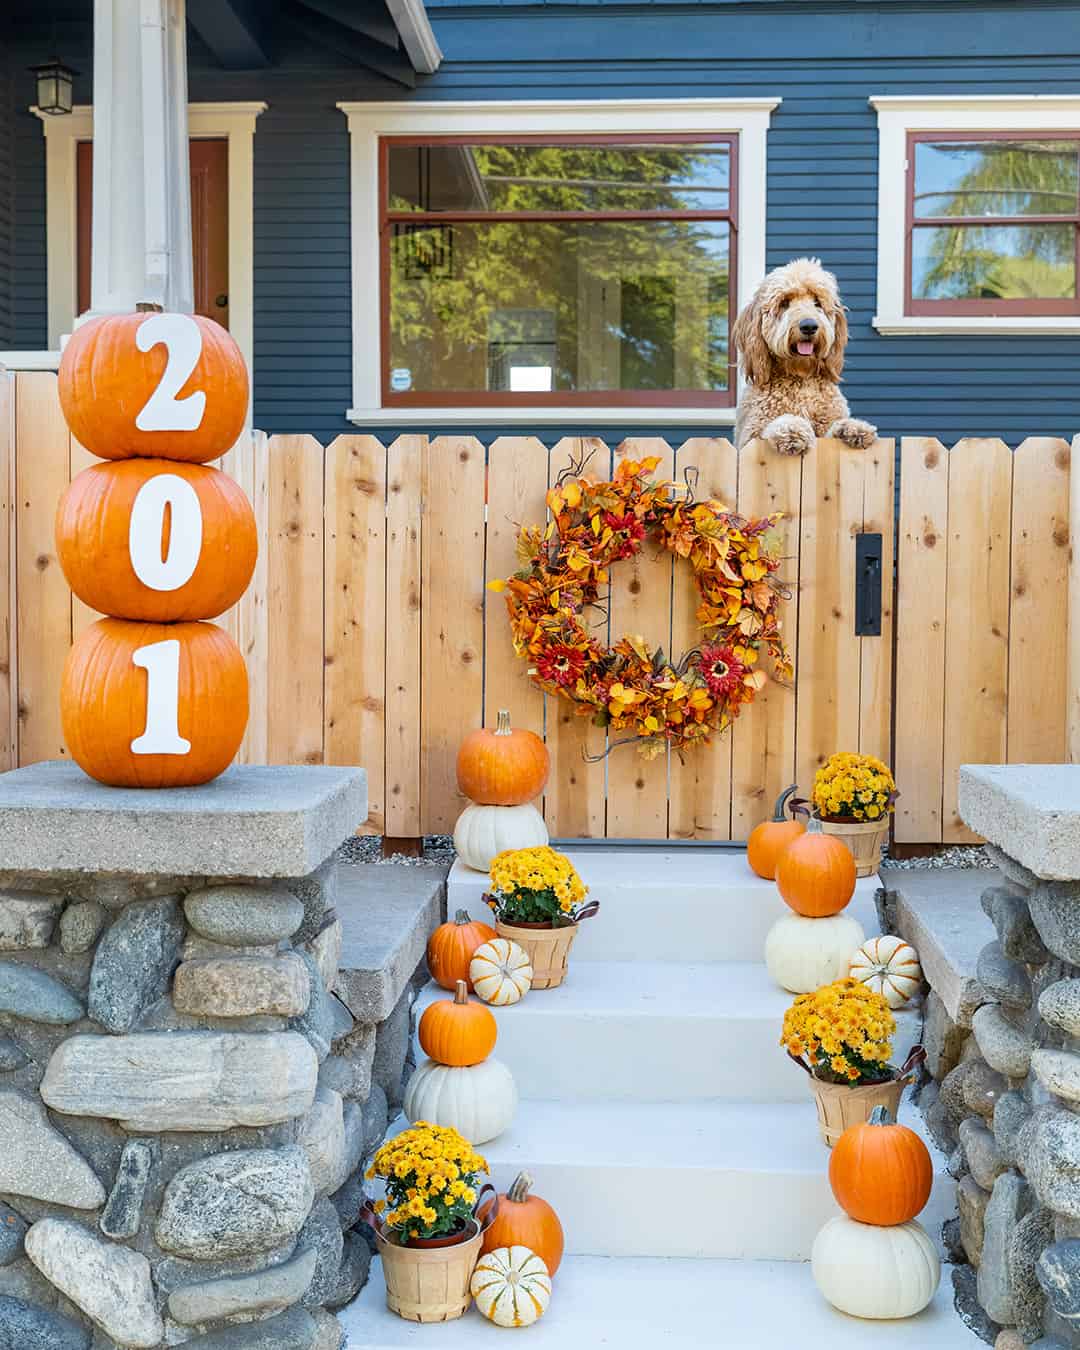 House Numbers on Pumpkin Decorations